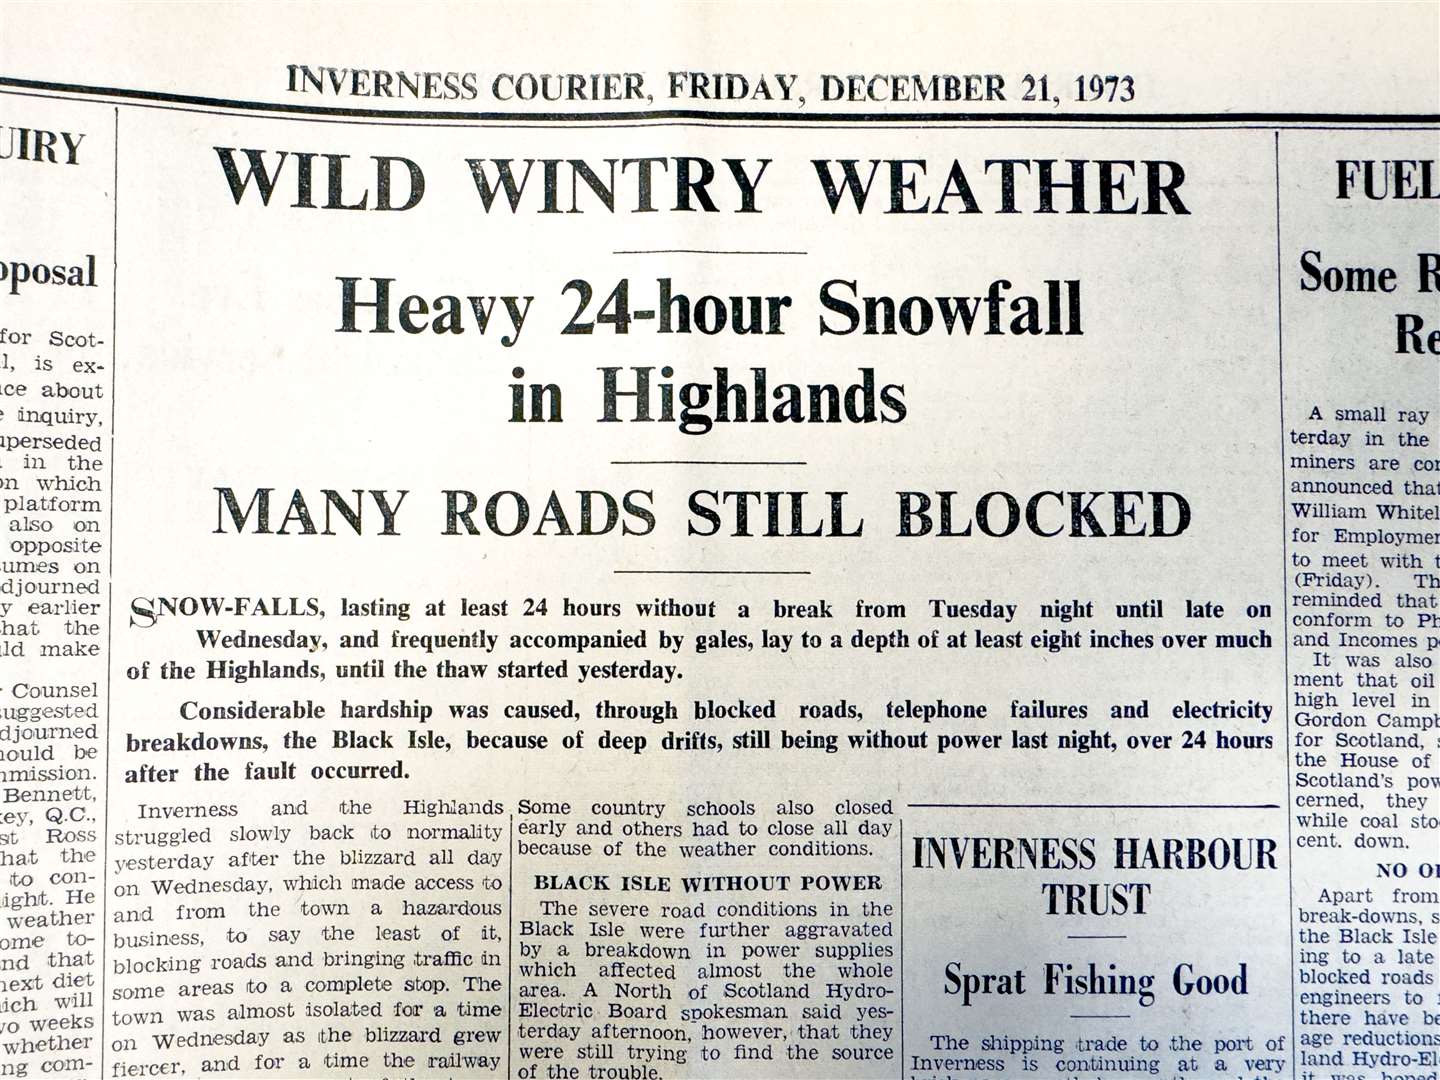 A blast of wintry weather heralded Christmas 1973.